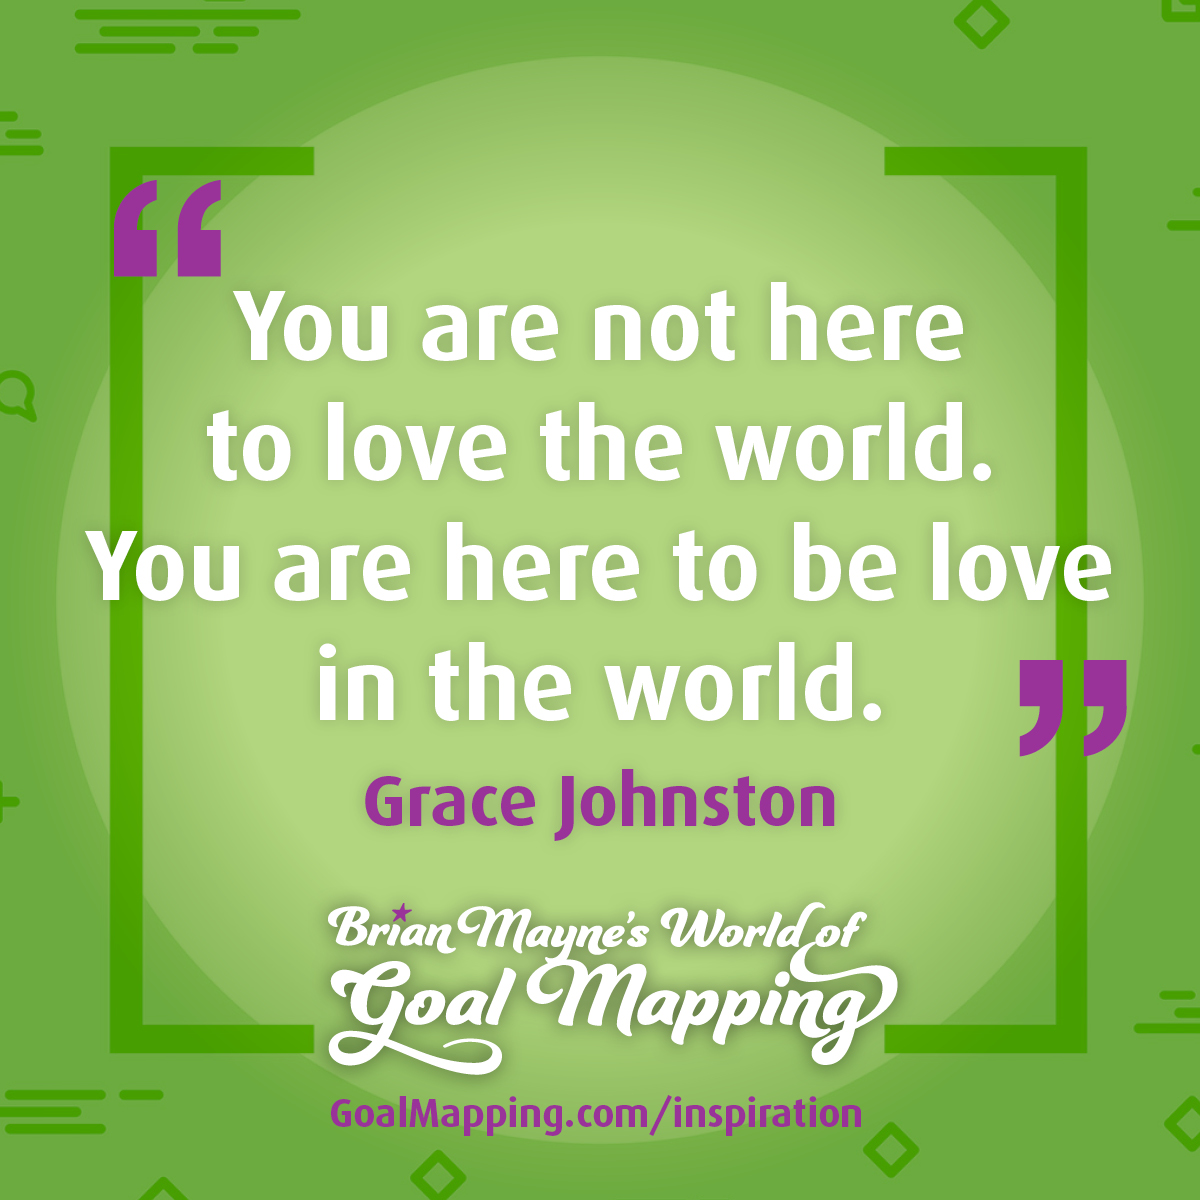 "You are not here to love the world. You are here to be love in the world." Grace Johnston